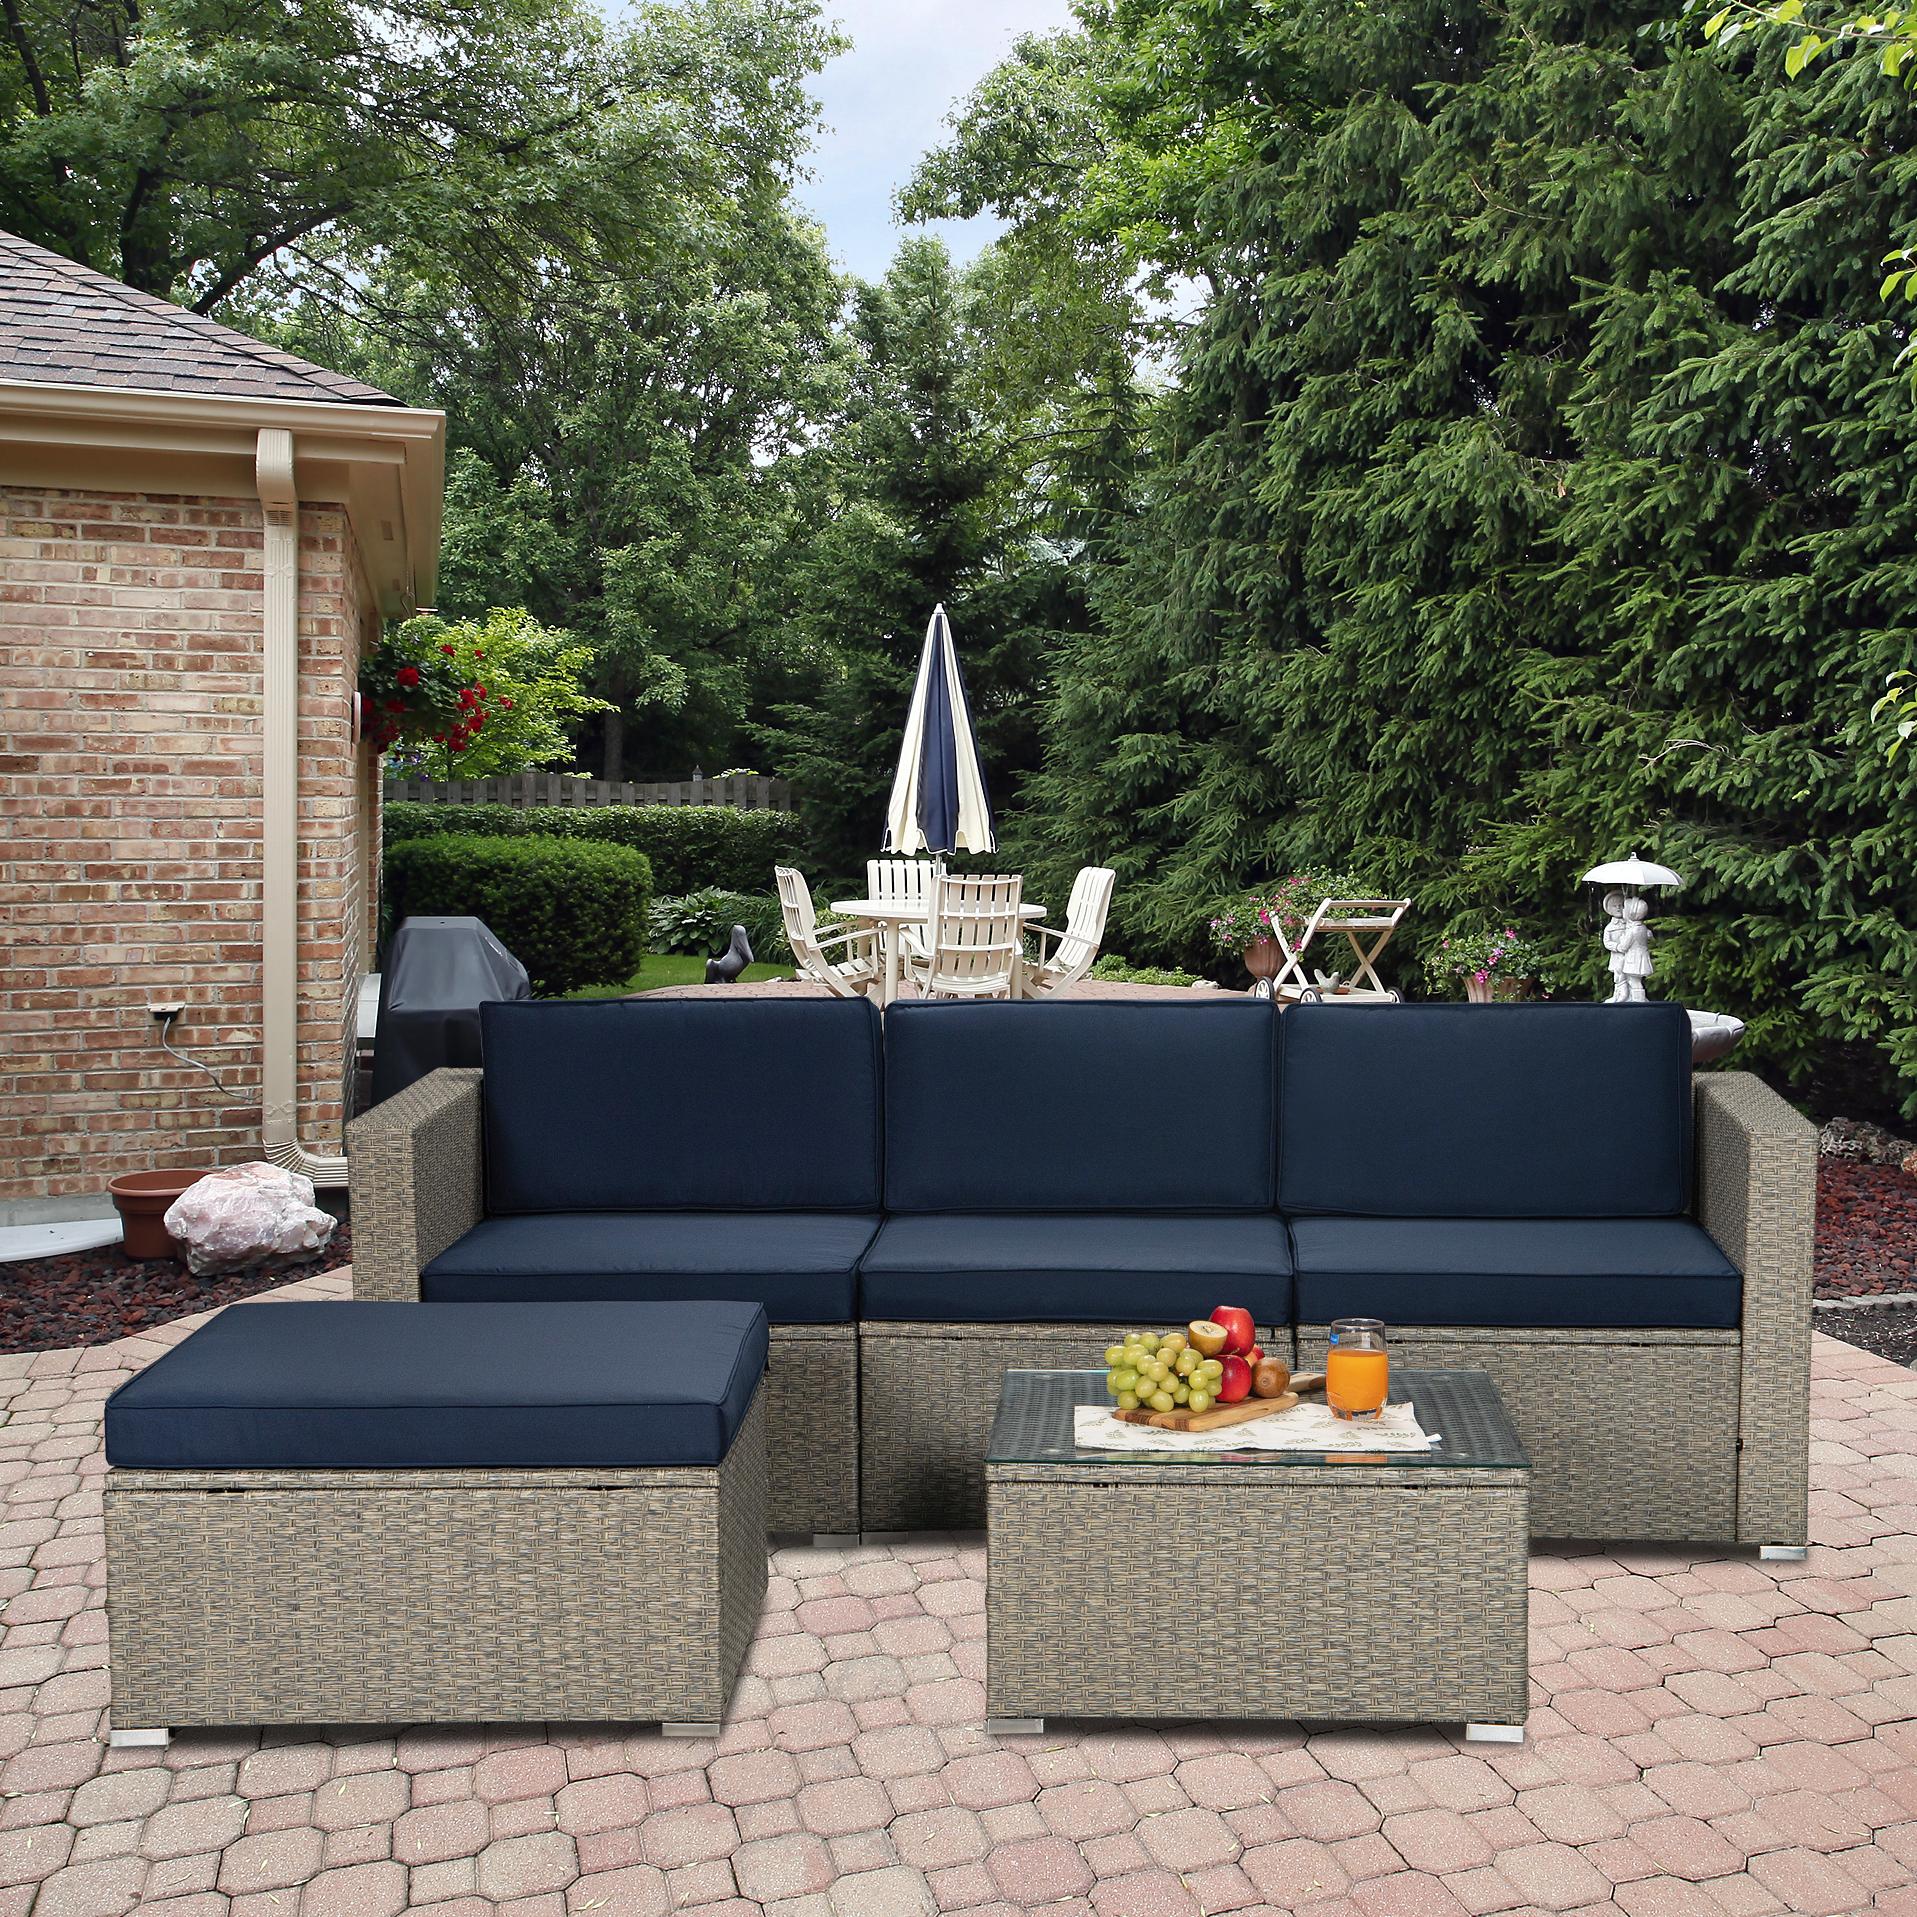 5 Pieces Patio Furniture Sets, iRerts Rattan Wicker Patio Sofa Sectional Set, Deck Furniture Set with Navy Cushion, Ottoman, Glass Table, Outdoor Patio Sofa Sets for Garden, Backyard, Porch, Gray - image 1 of 10